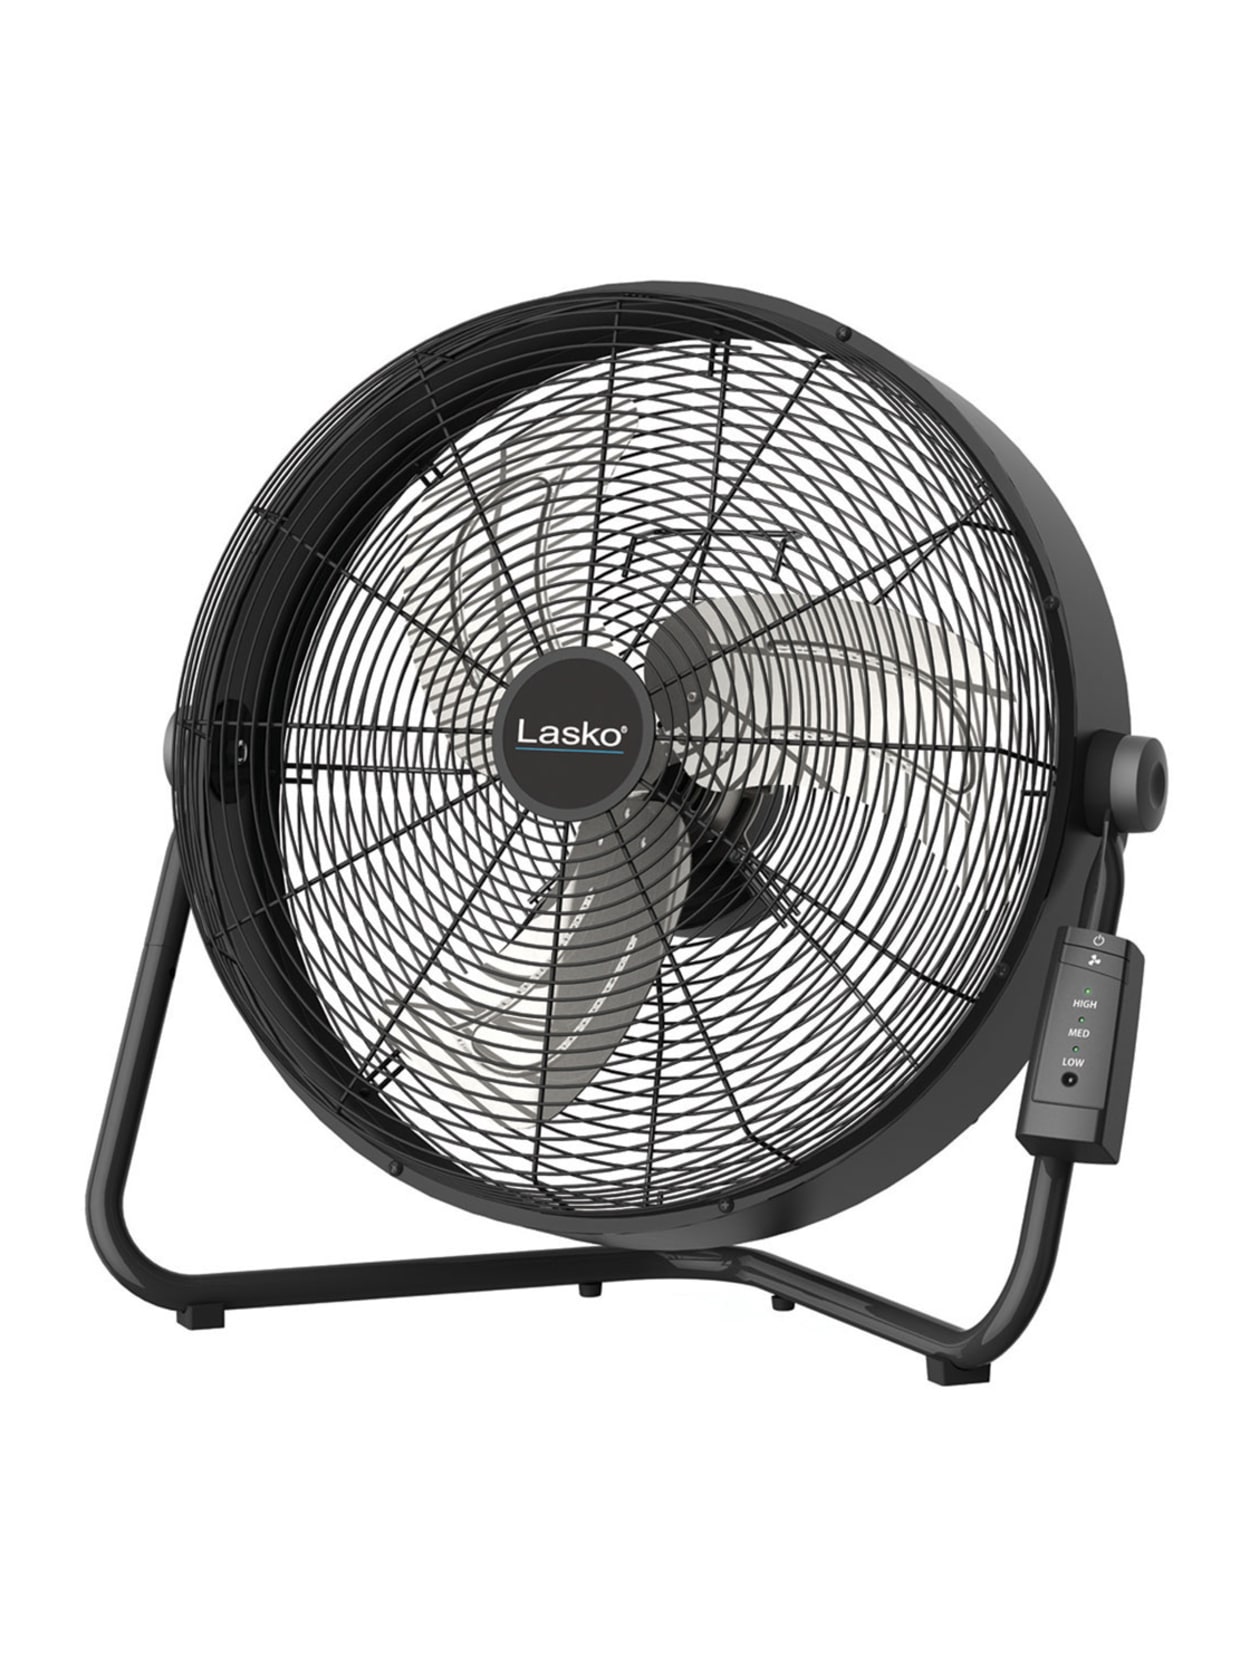 Lasko 20 3 Speed High Velocity Fan With Remote Control 22 H X